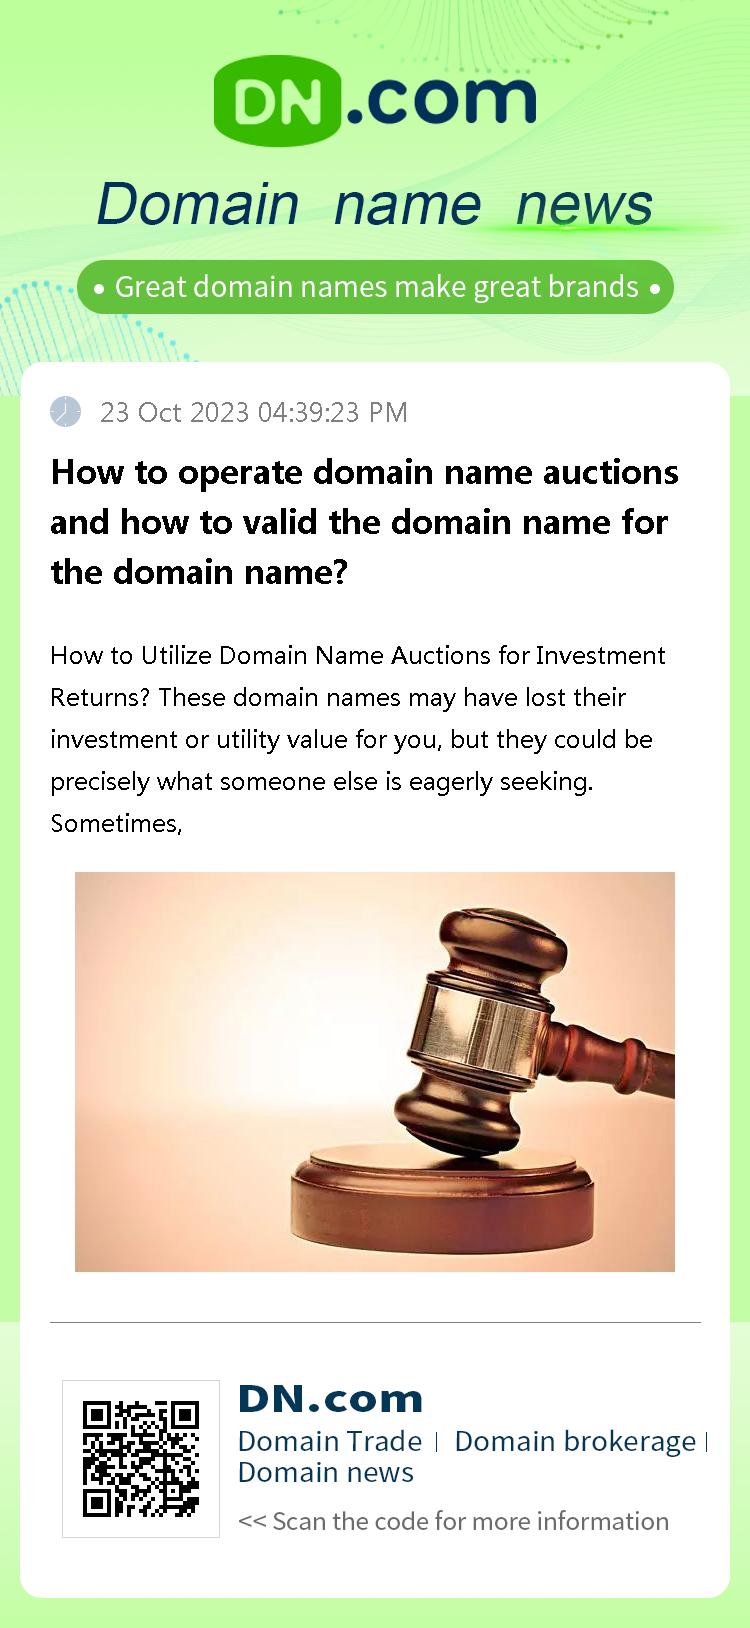 How to operate domain name auctions and how to valid the domain name for the domain name?